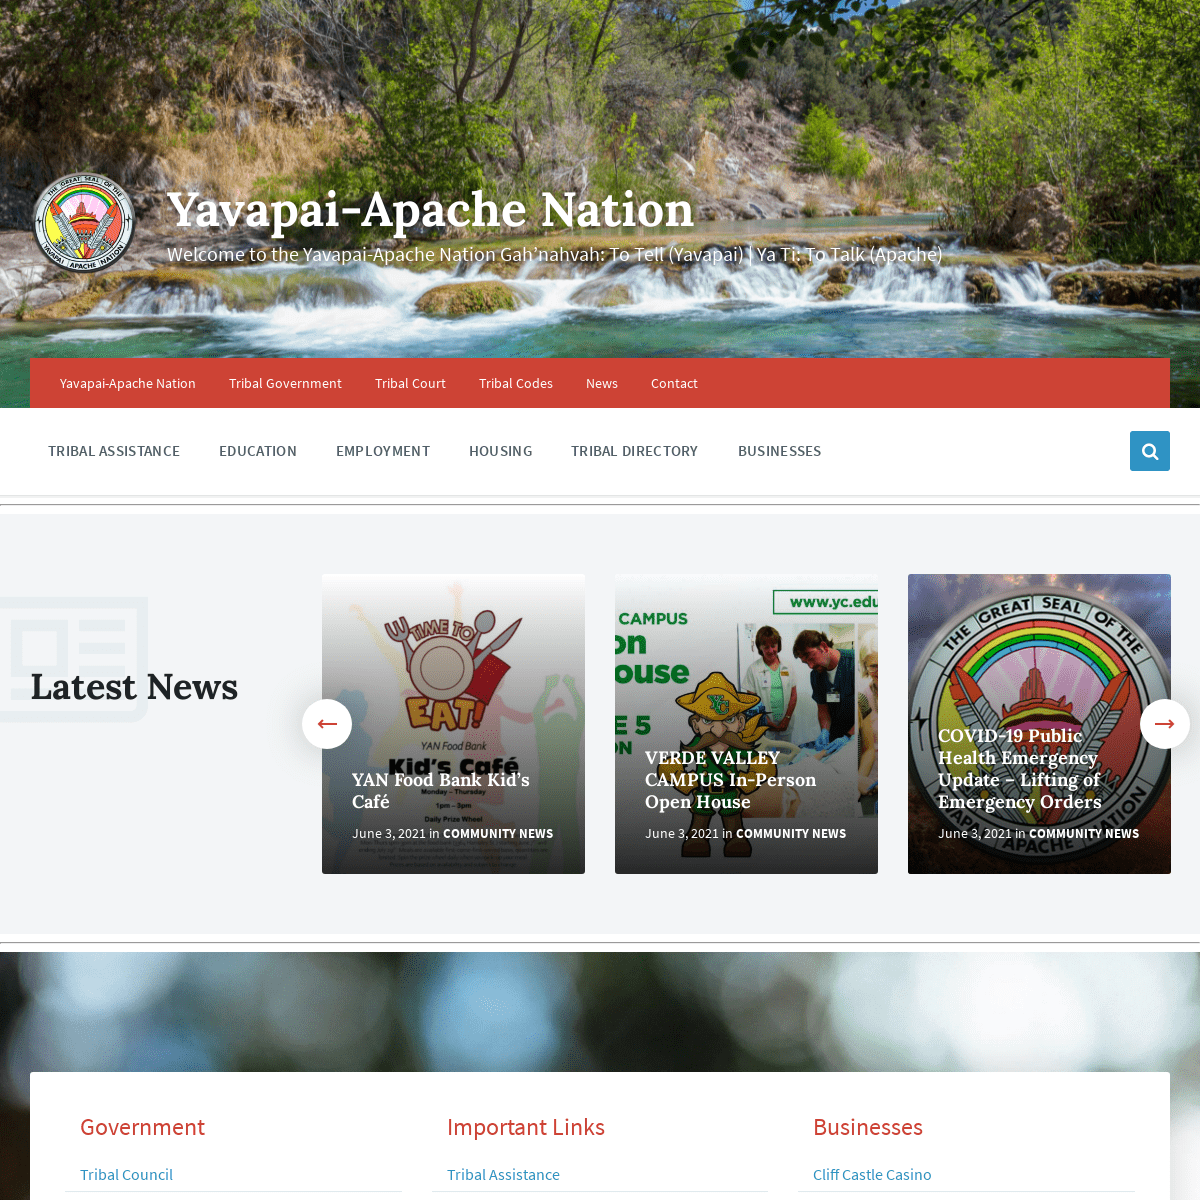 A complete backup of https://yavapai-apache.org